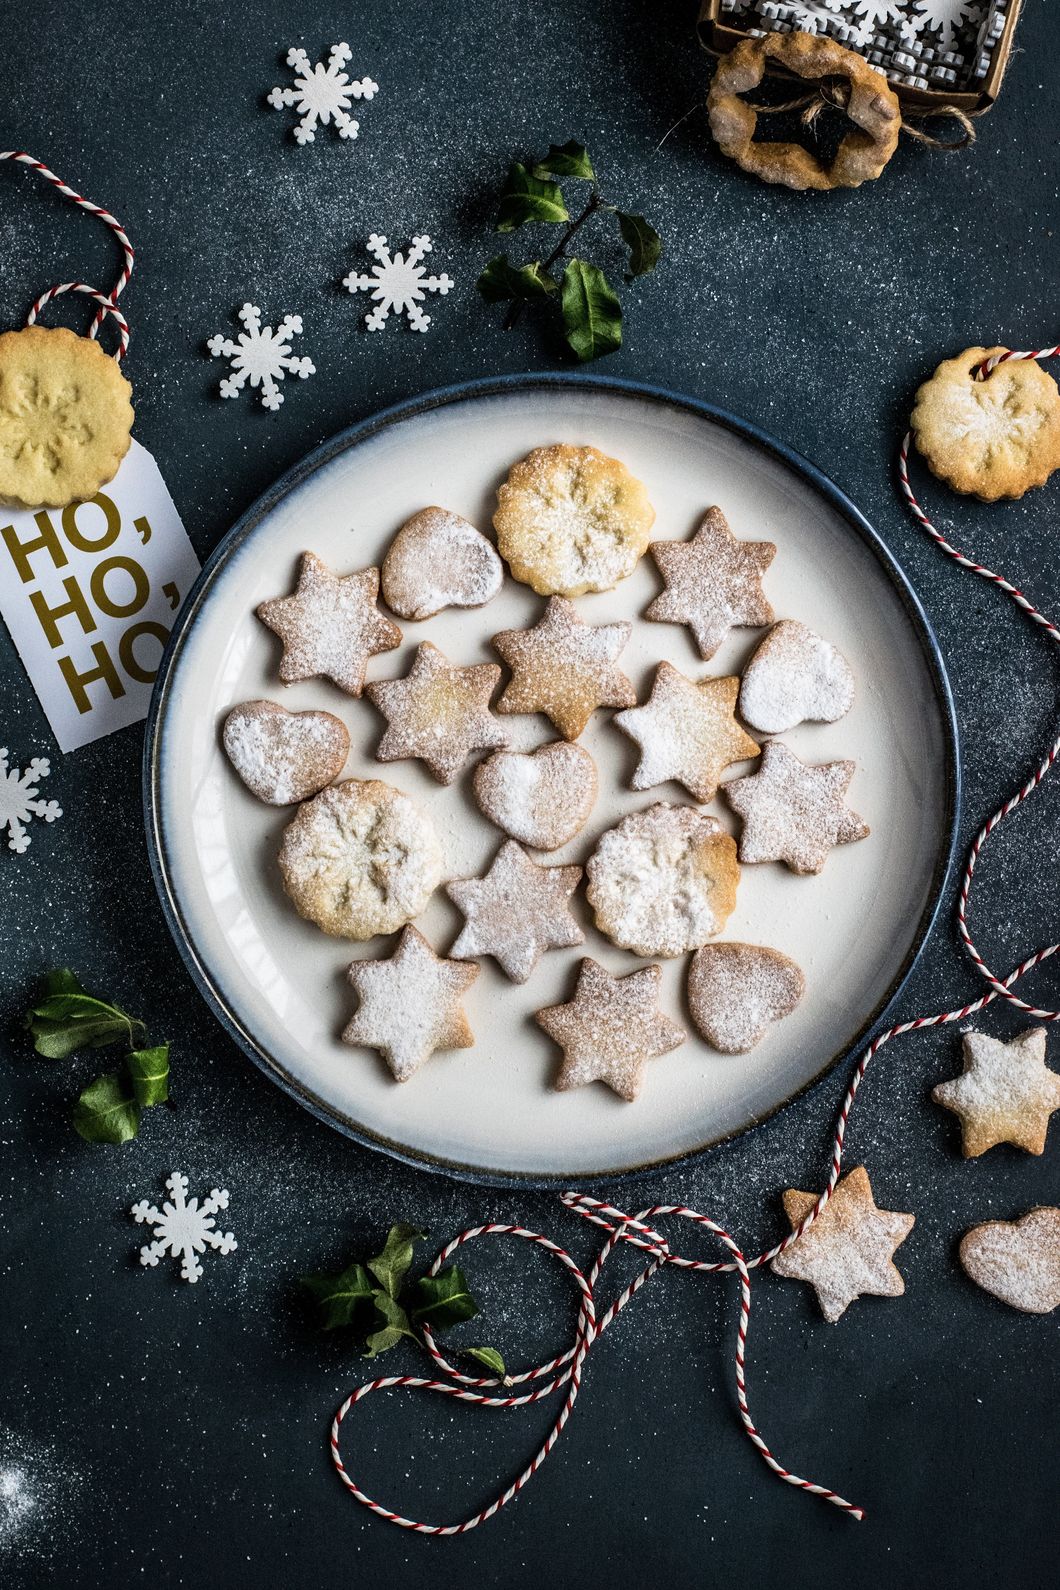 12 Traditional Christmas Cookie Recipes That Are Better Homemade Than Store-Bought